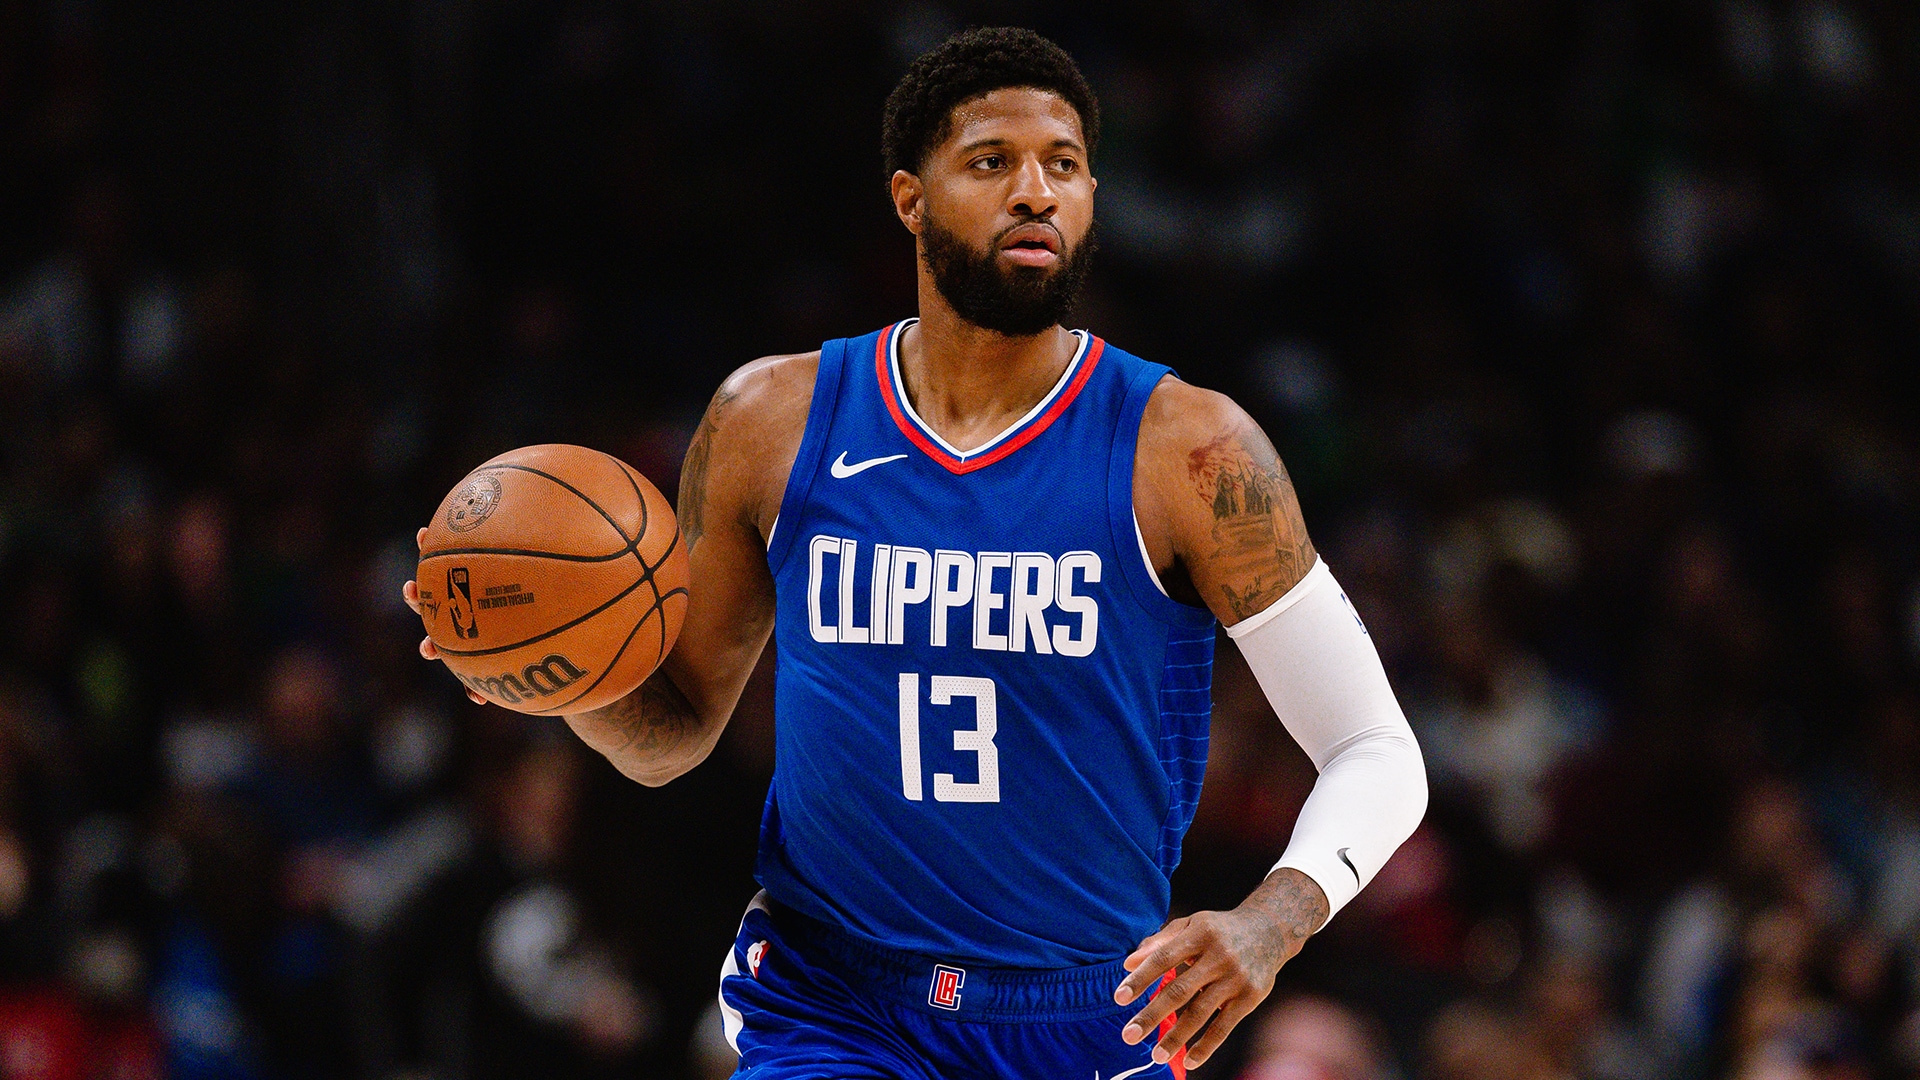 Paul George's Clippers Conundrum: A High-Stakes Game of Contract Negotiations